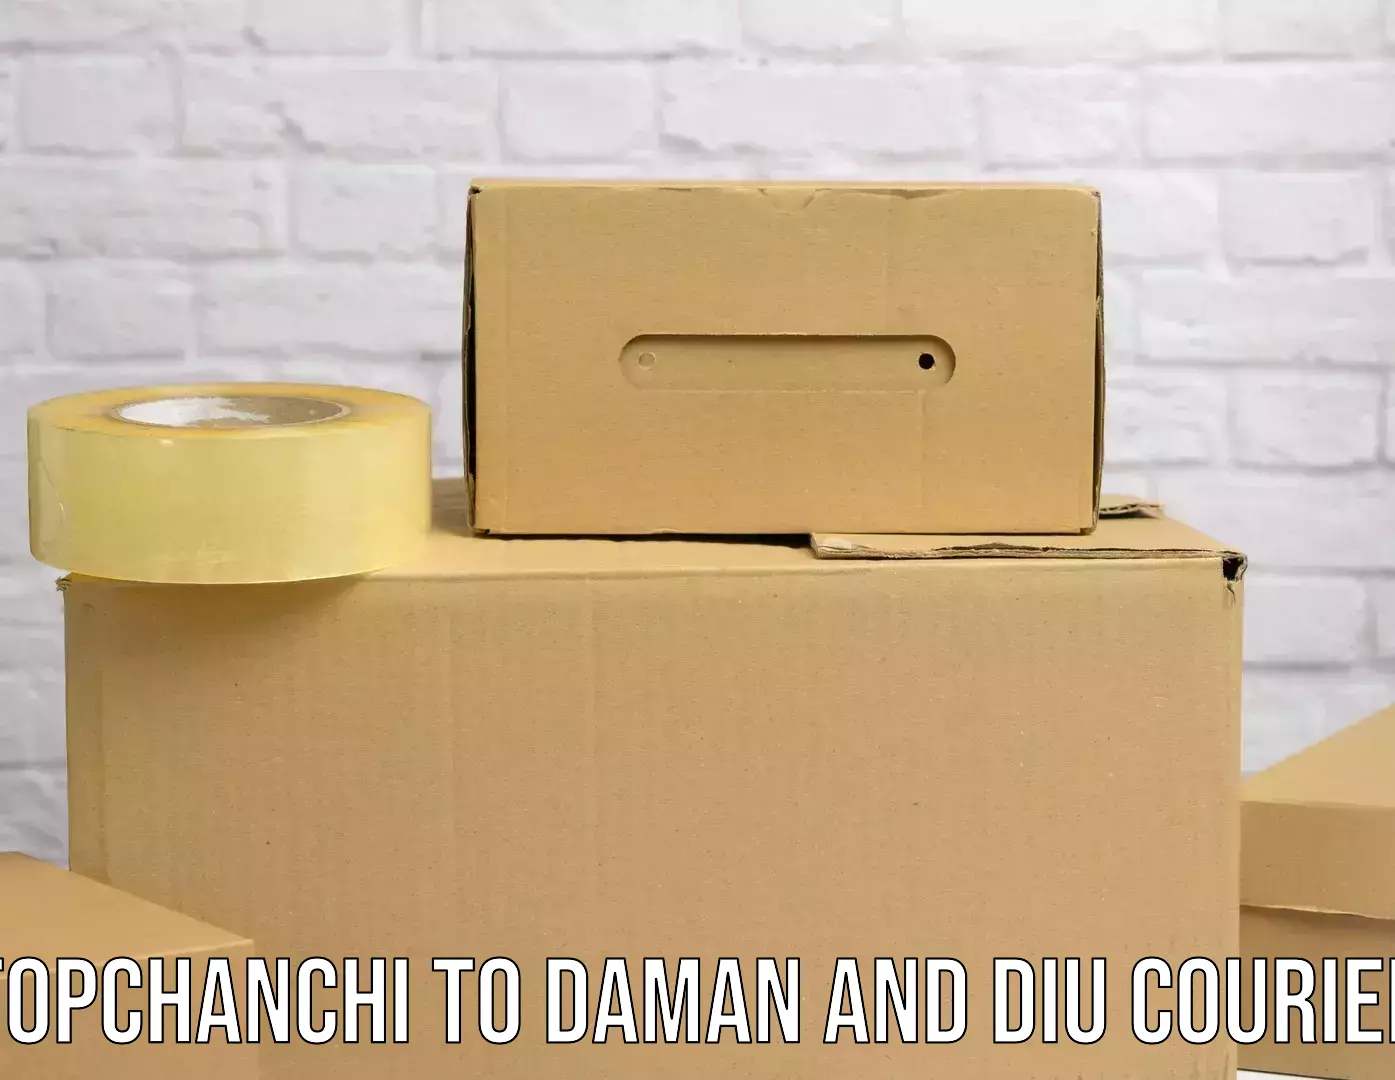 Global shipping networks in Topchanchi to Daman and Diu